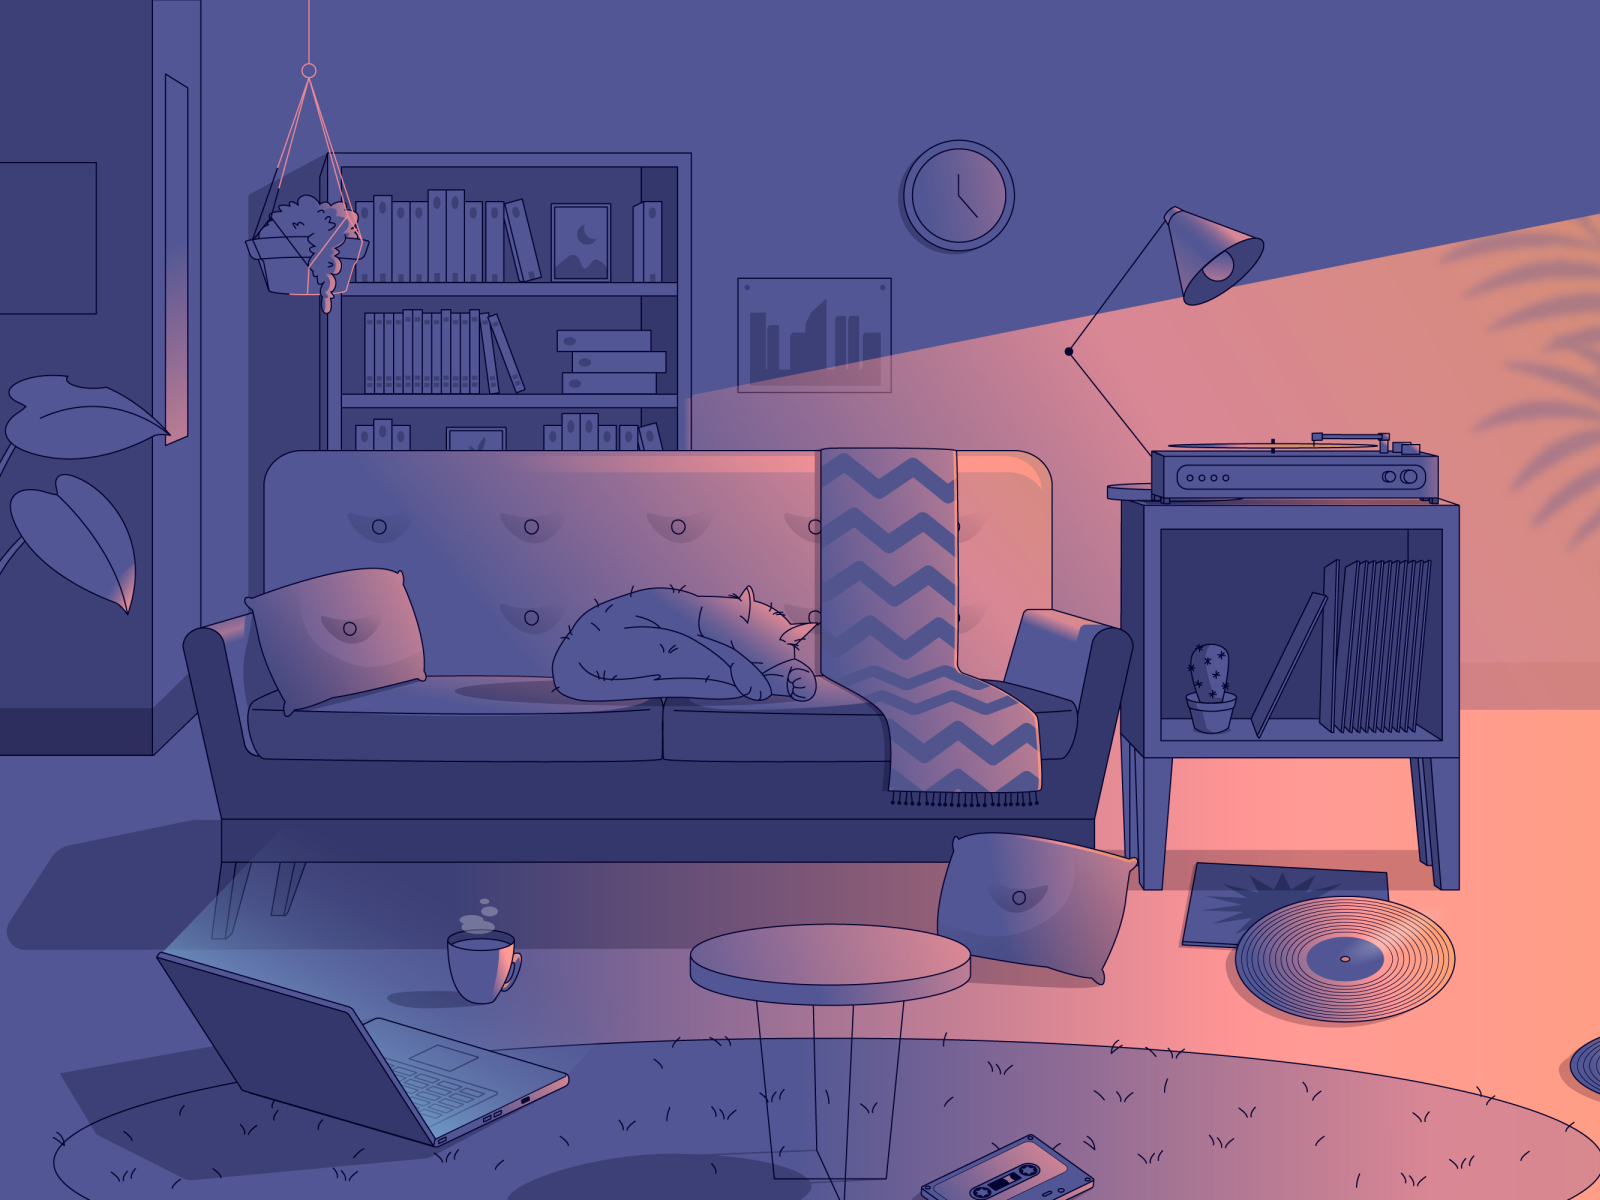 Lo-fi Living Room by Jessica Gueller on Dribbble